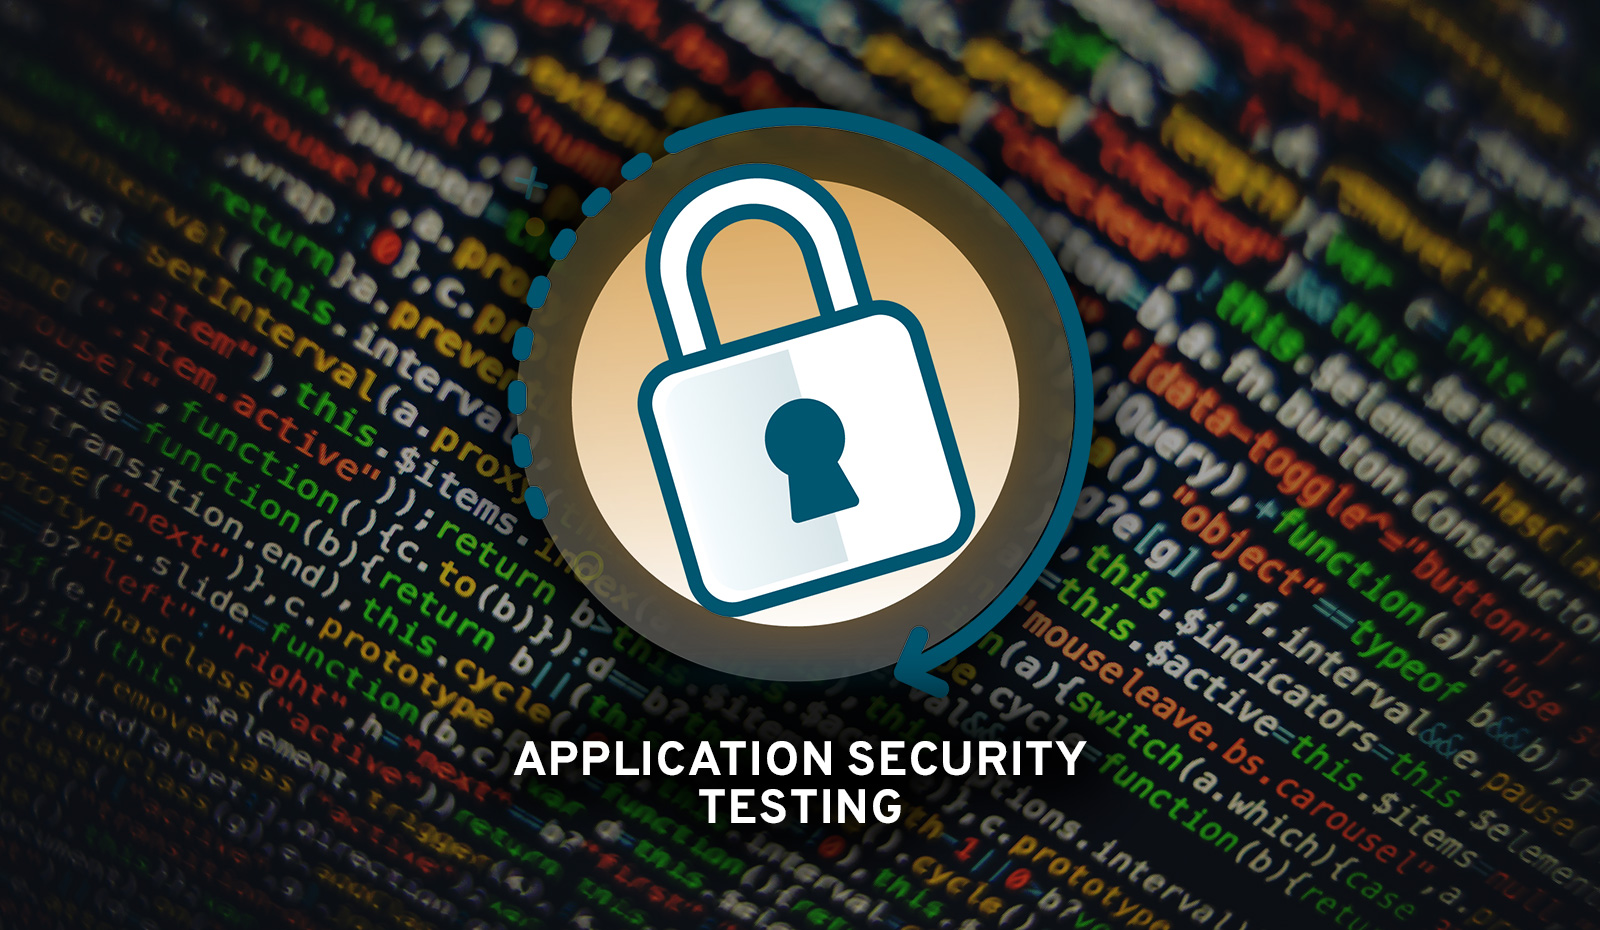 Synopsys Recognised as a Leader in Static Application Security Testing by Independent Research Firm